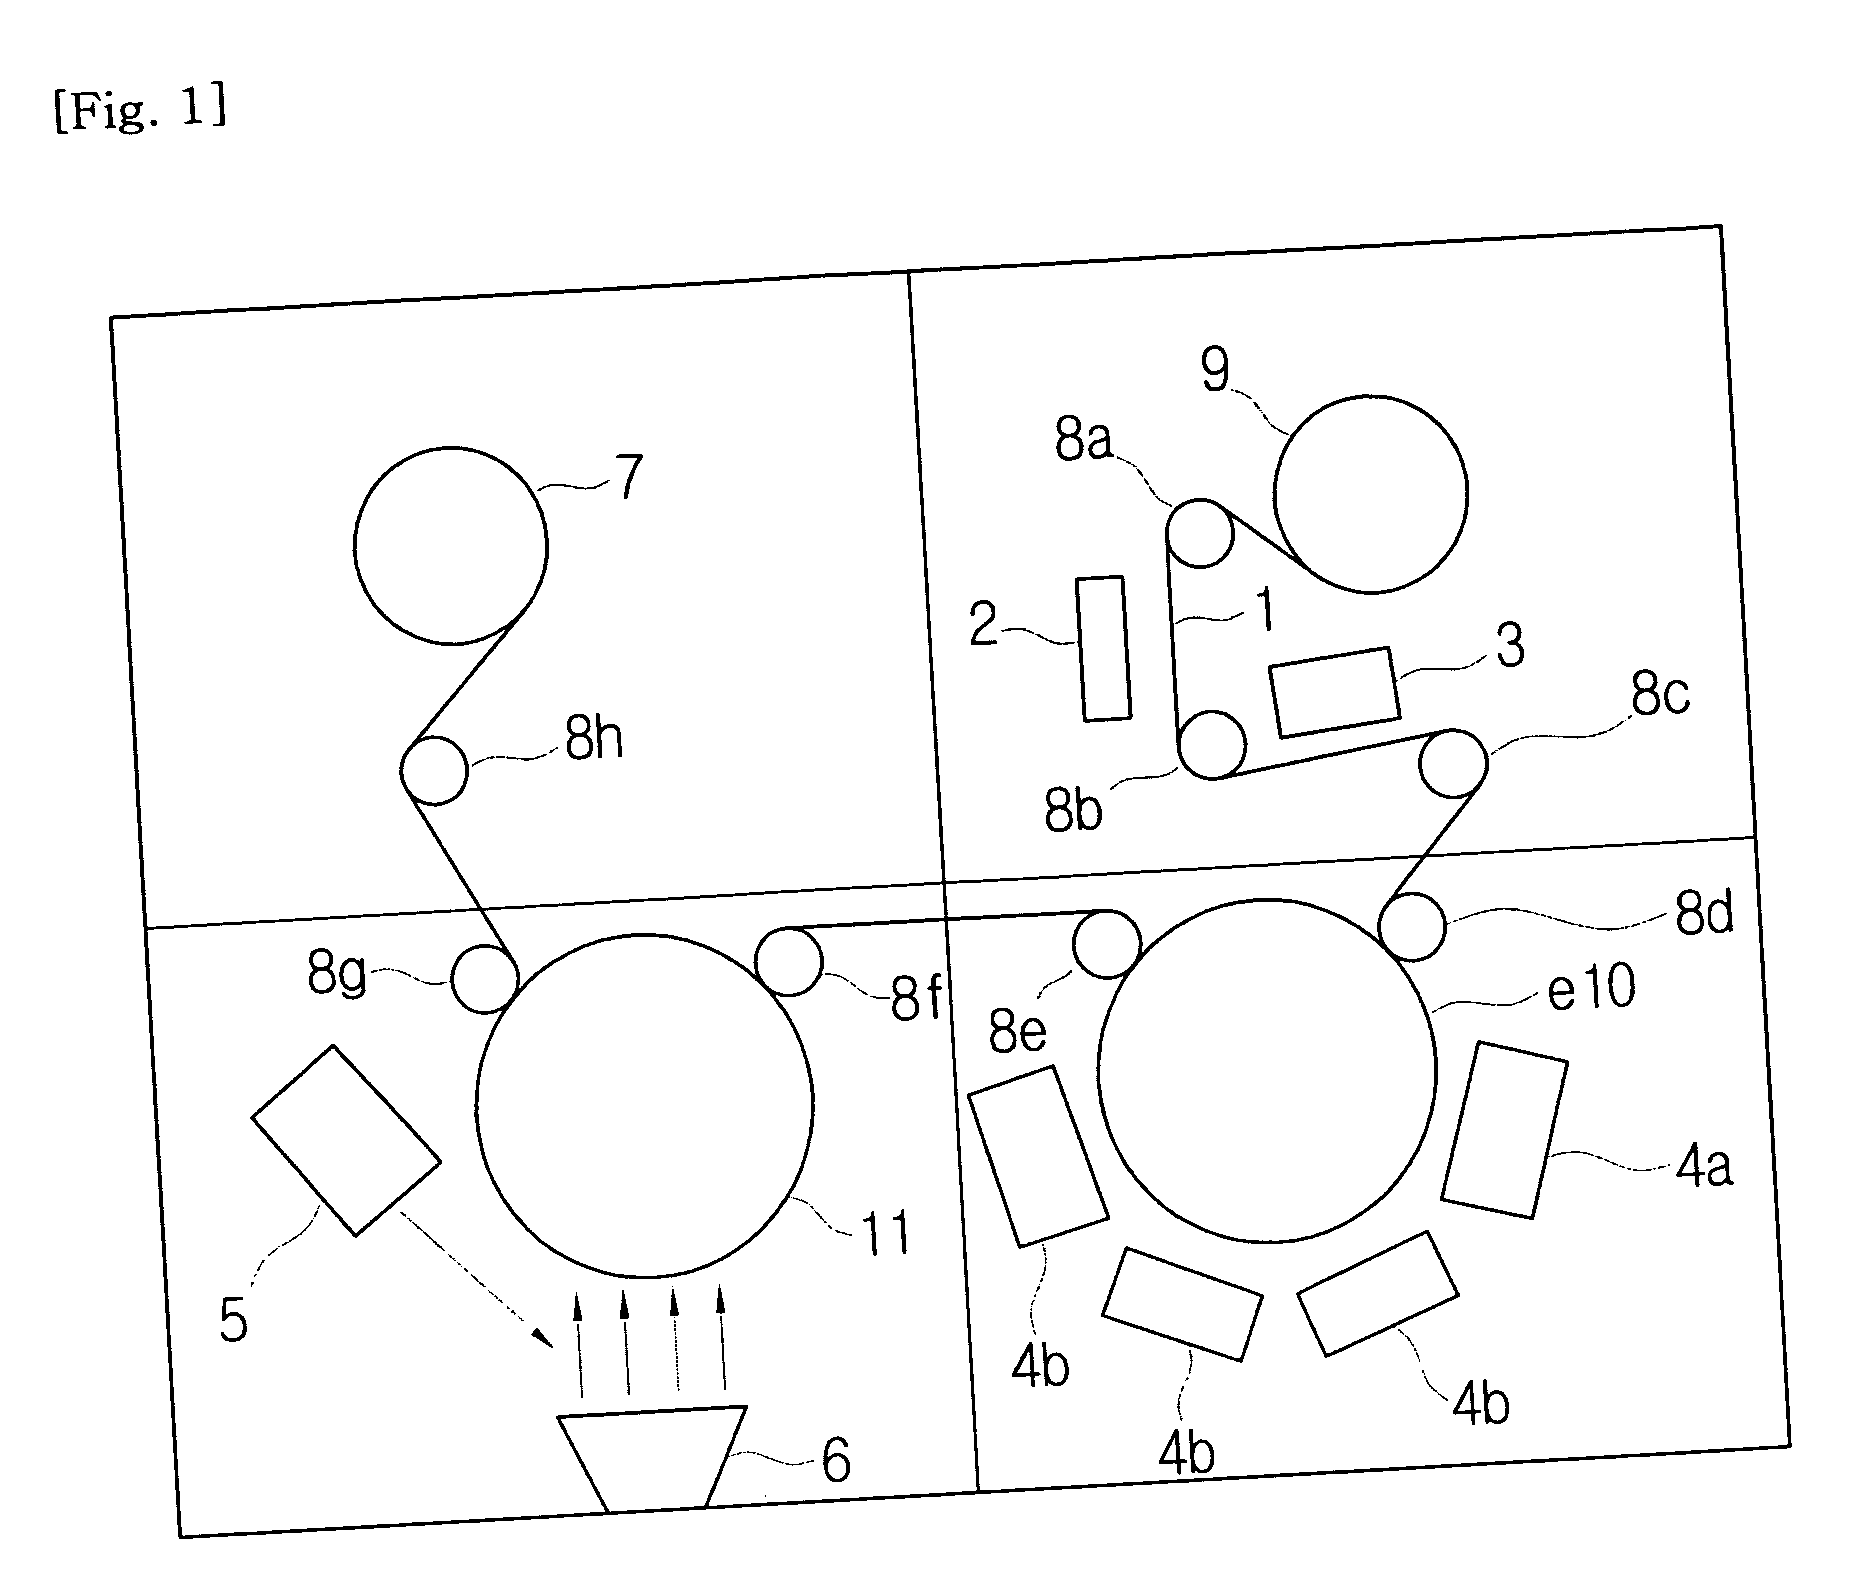 Method and apparatus for manufacturing laminate for flexible printed circuit board having metal plated layer using vacuum deposition